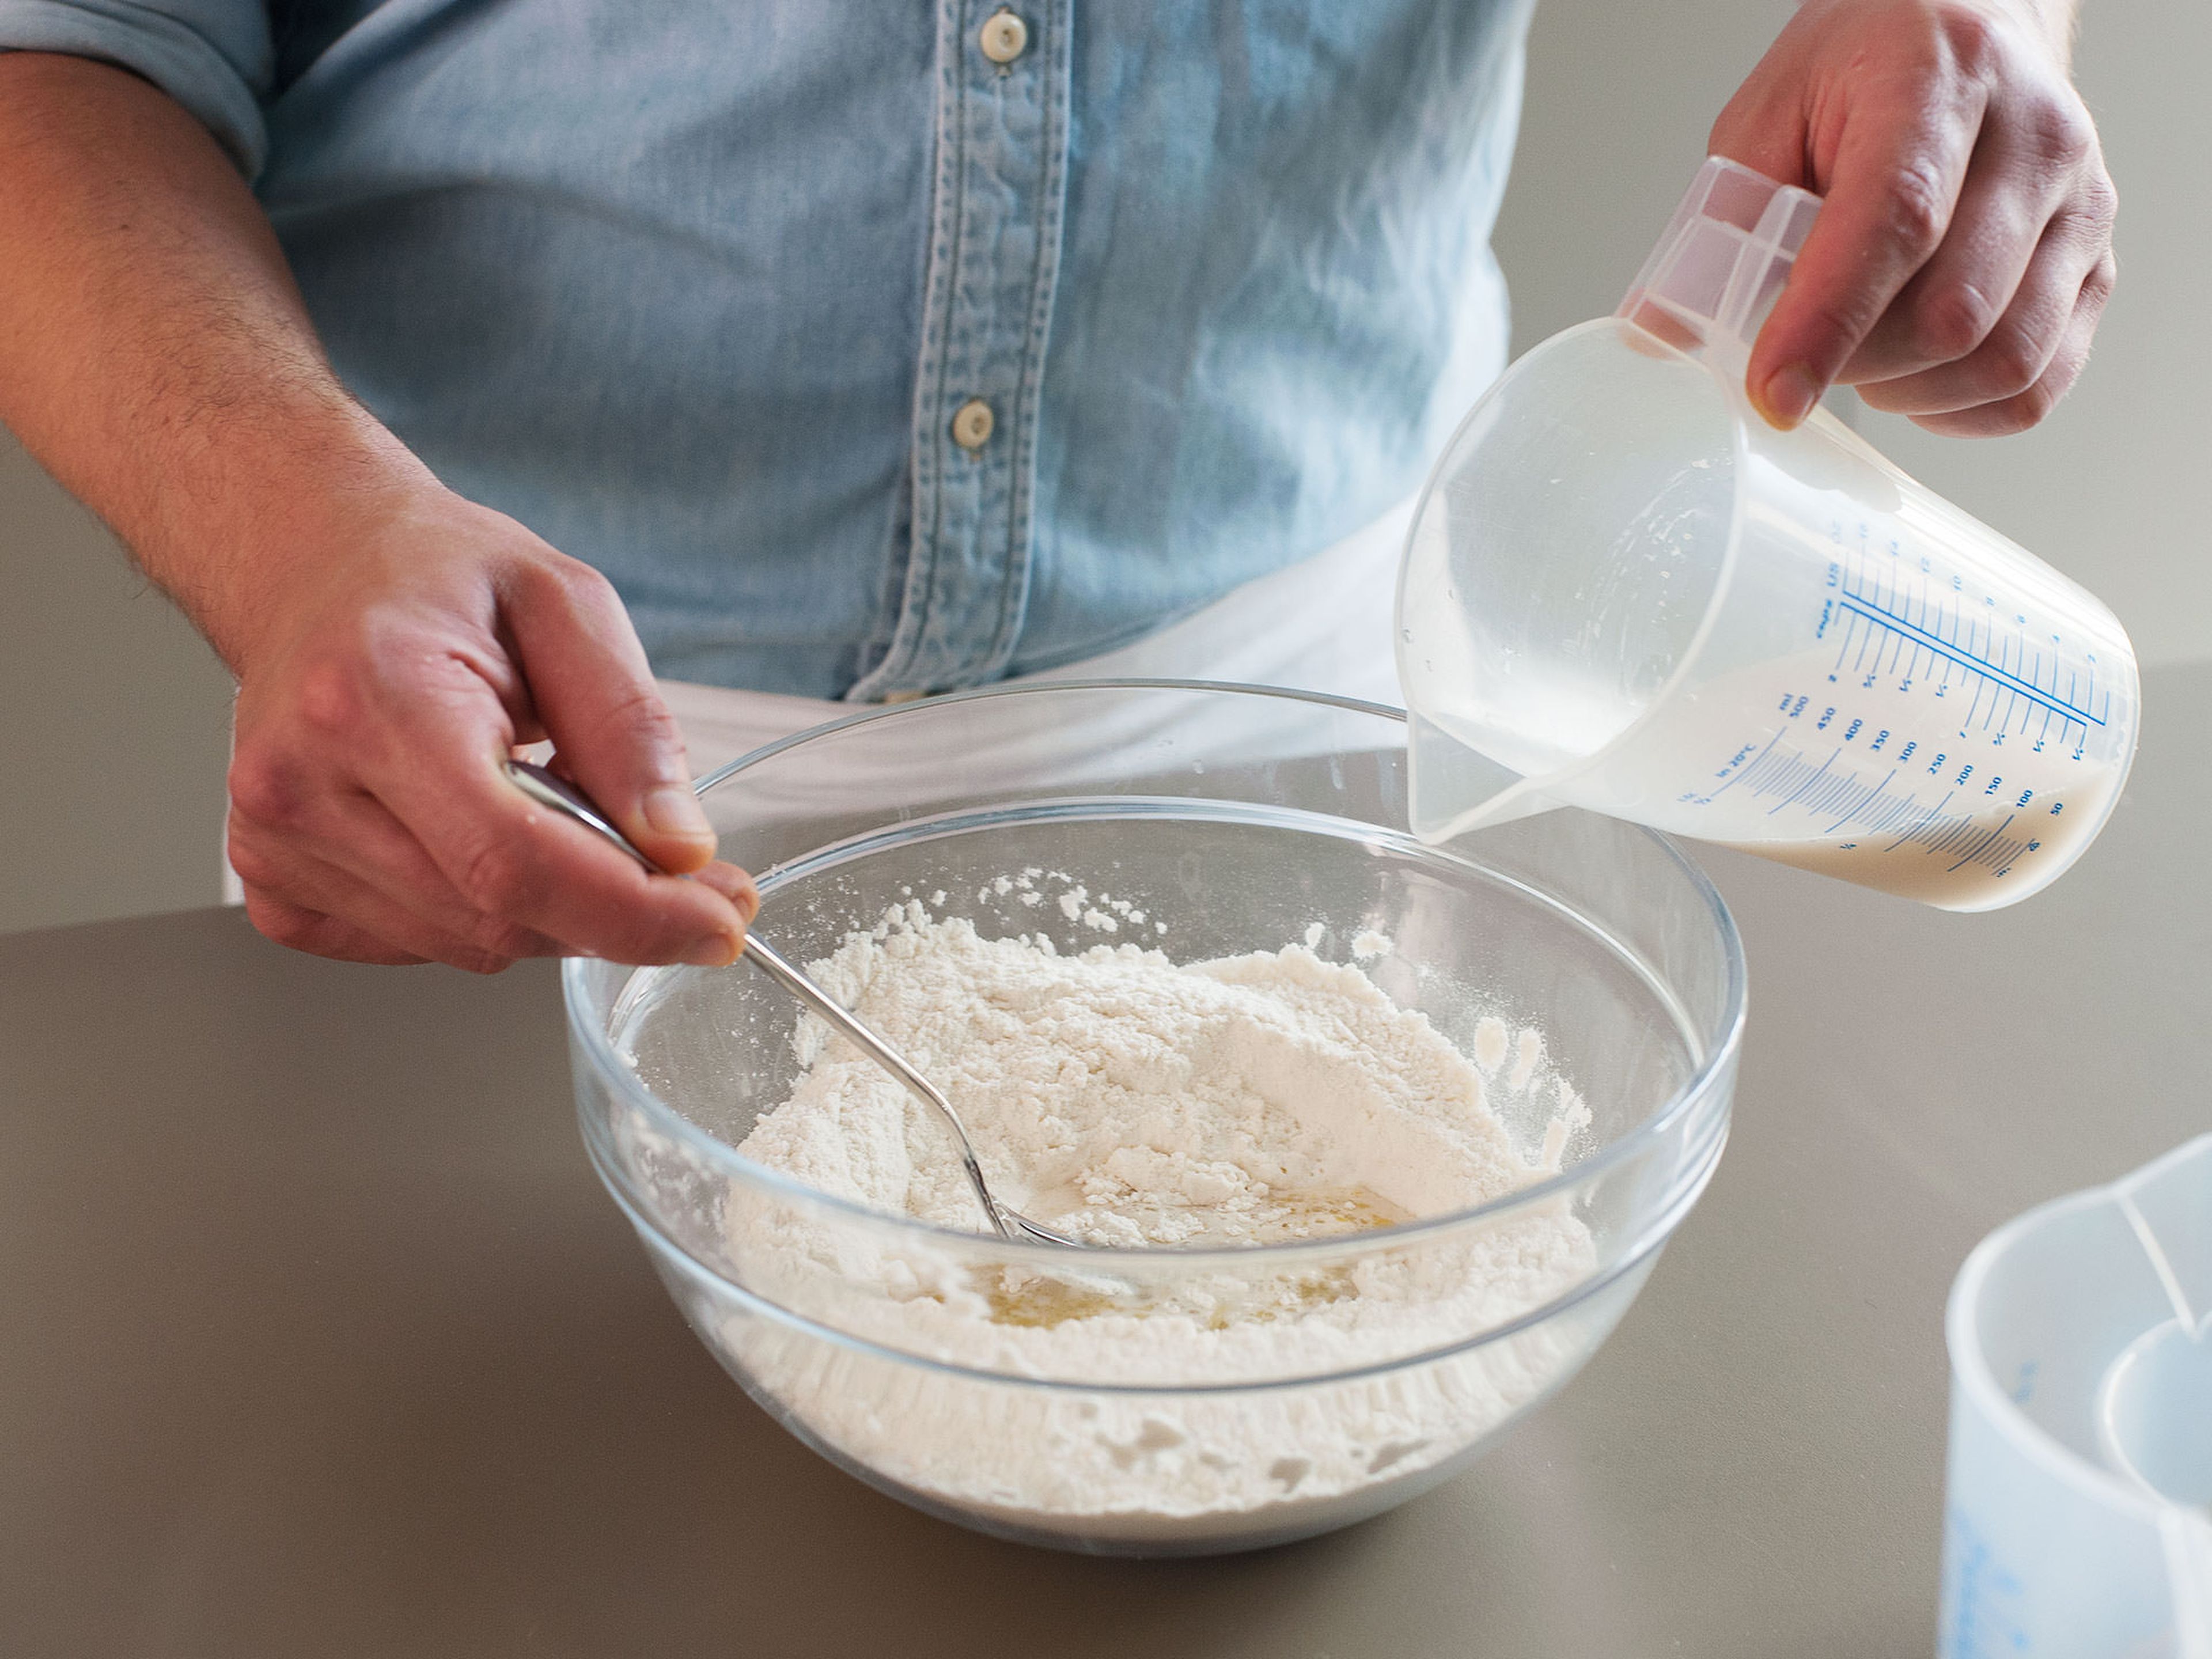 In a large mixing bowl, mix together flour and salt. Then add olive oil and water mixture to center of the flour and mix together until well incorporated.